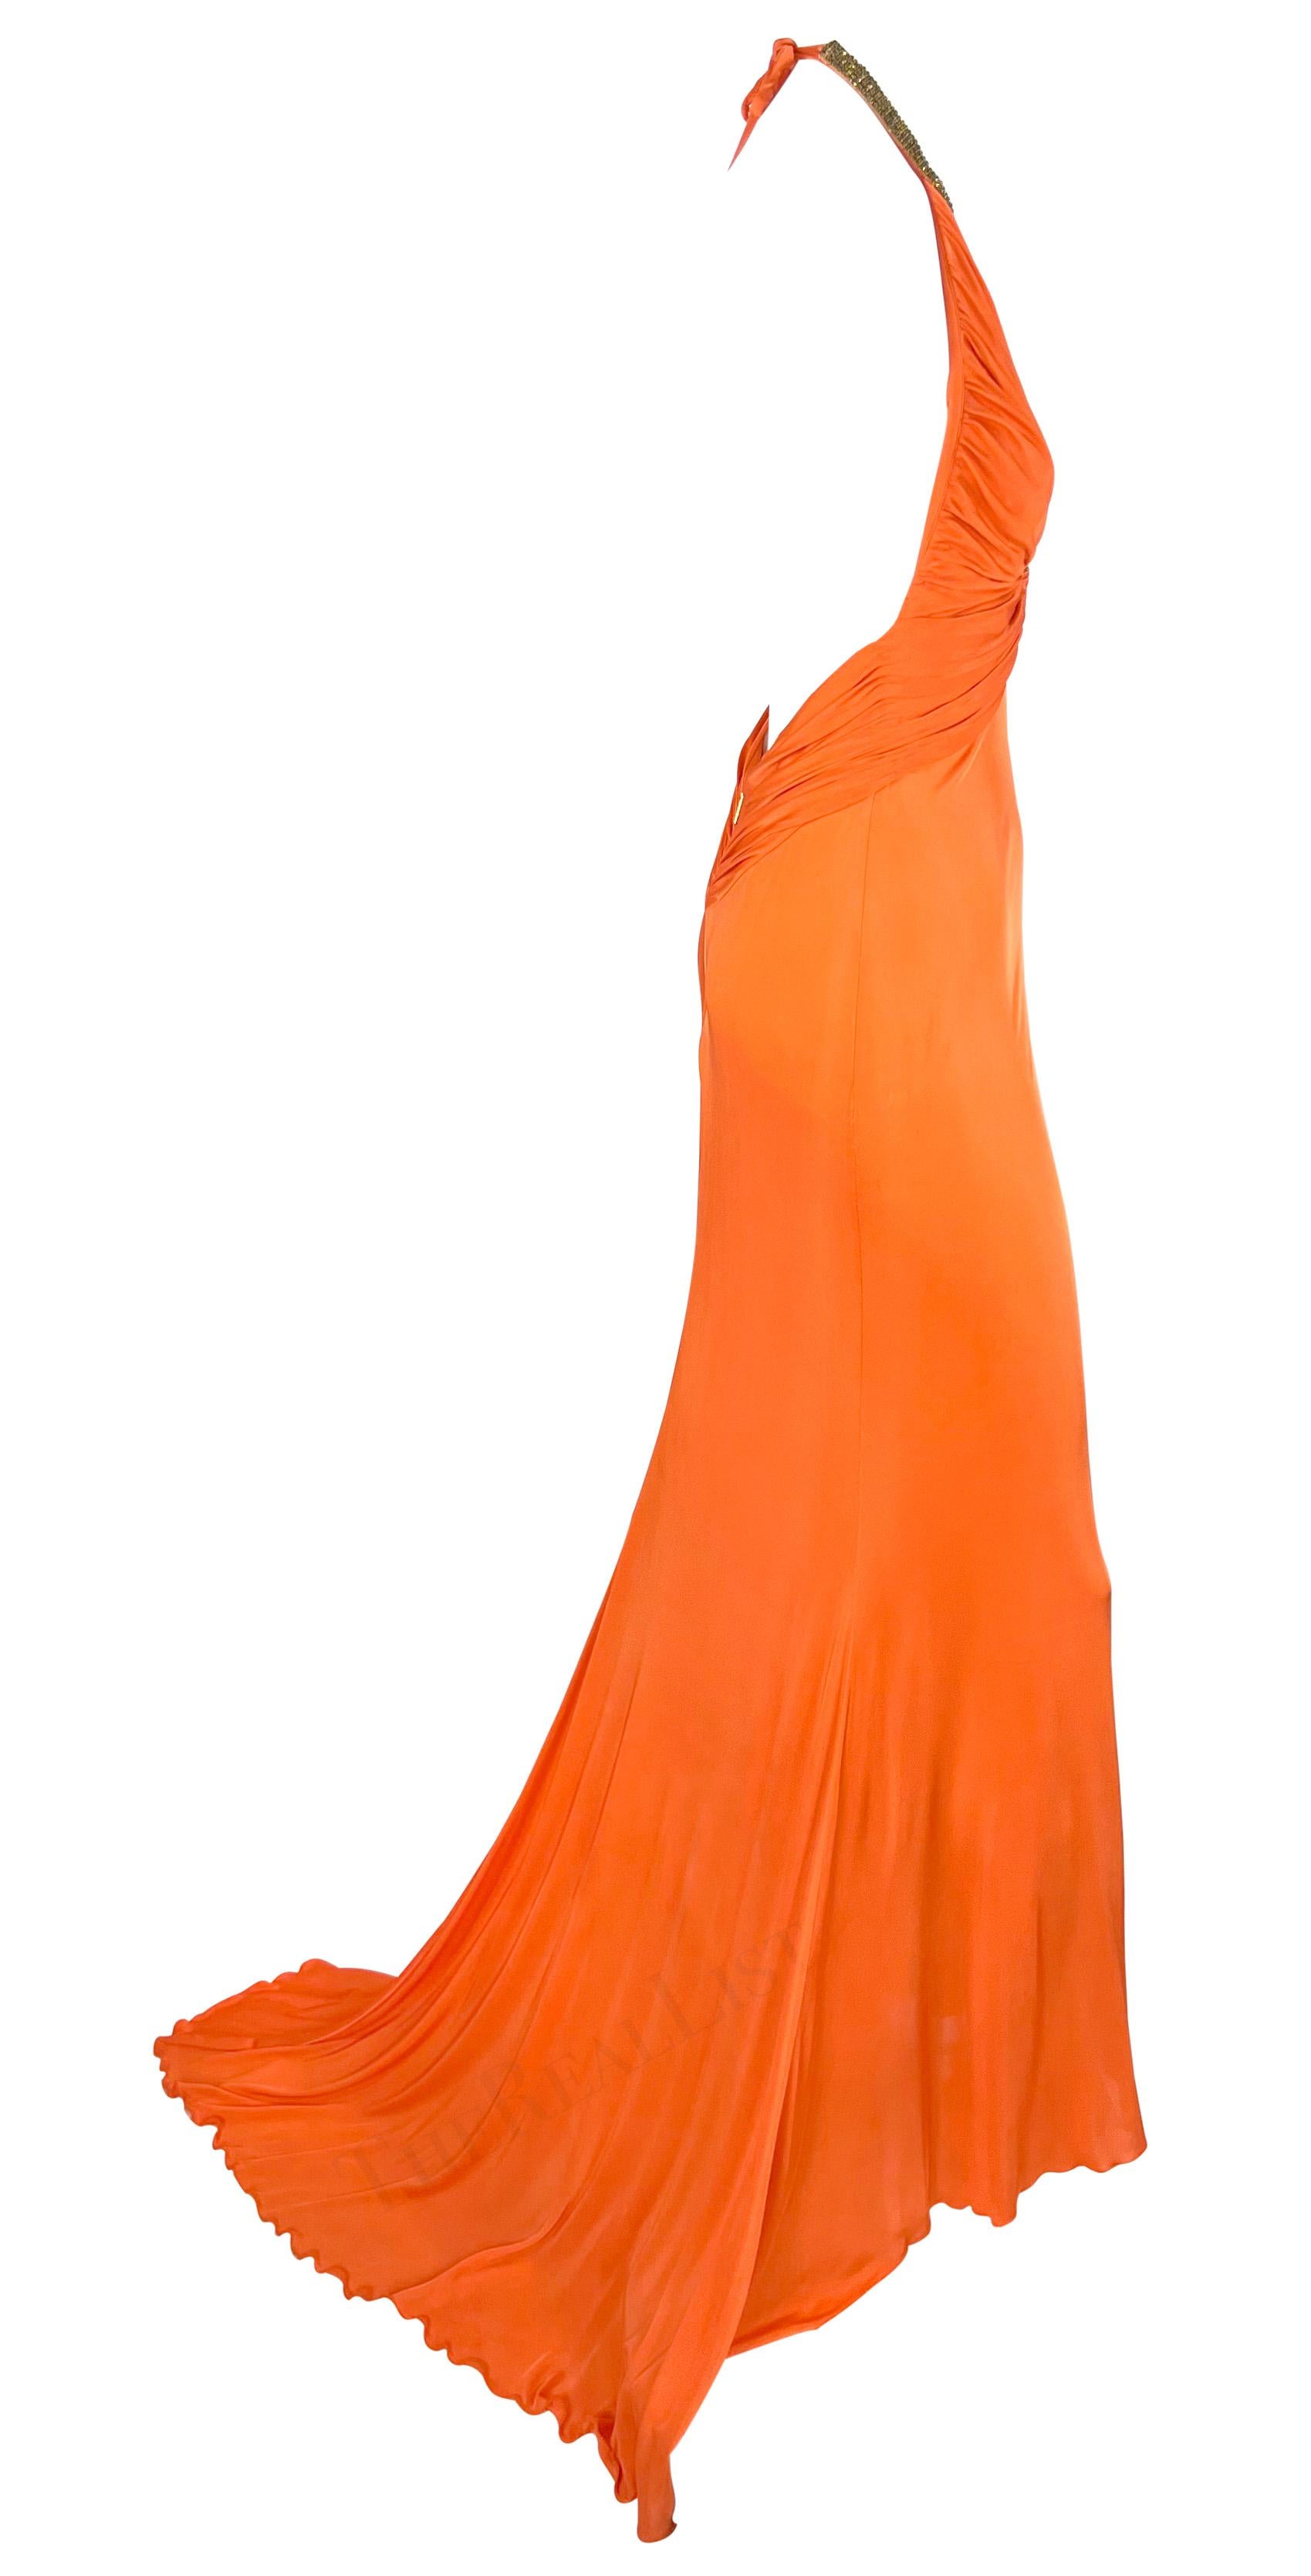 Women's S/S 2005 Roberto Cavalli Backless Orange Bodycon Gold Sequin Plunging Gown For Sale